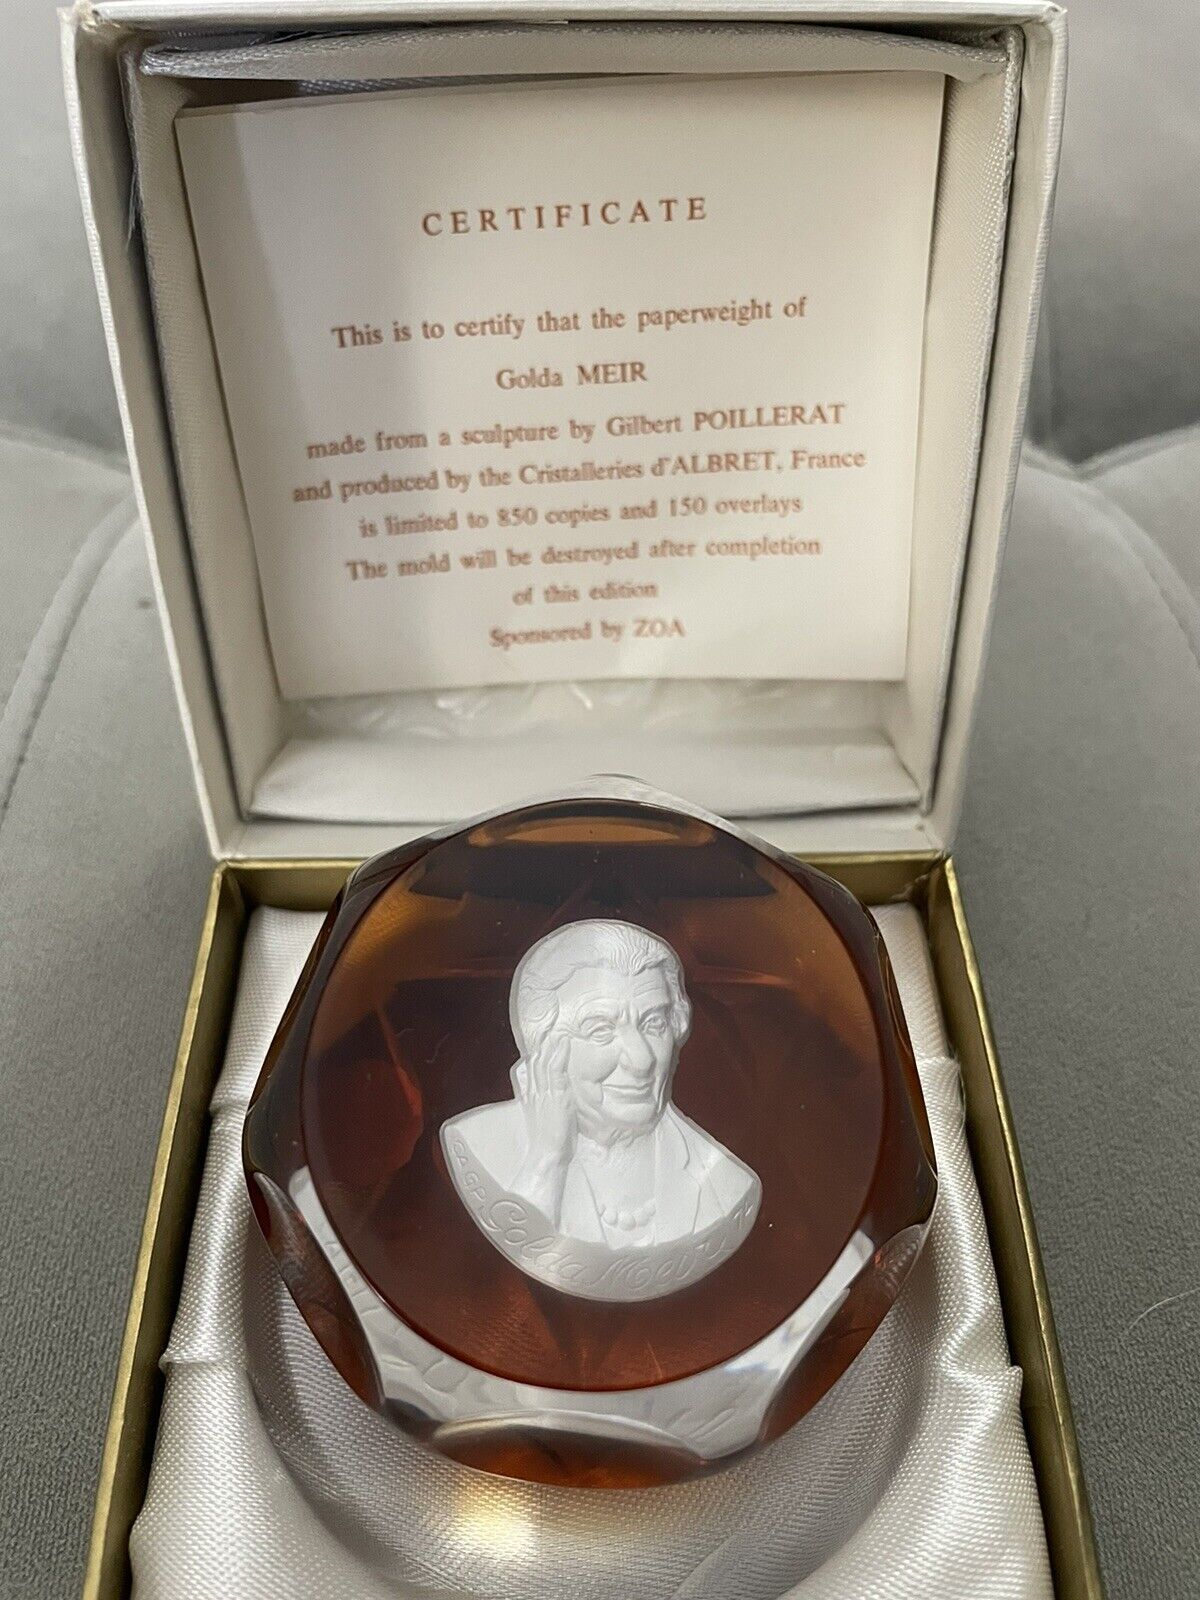 VTG CRISTAL D'ALBRET Golda Meir Faceted Sulfide Paperweight French Judaica Glass